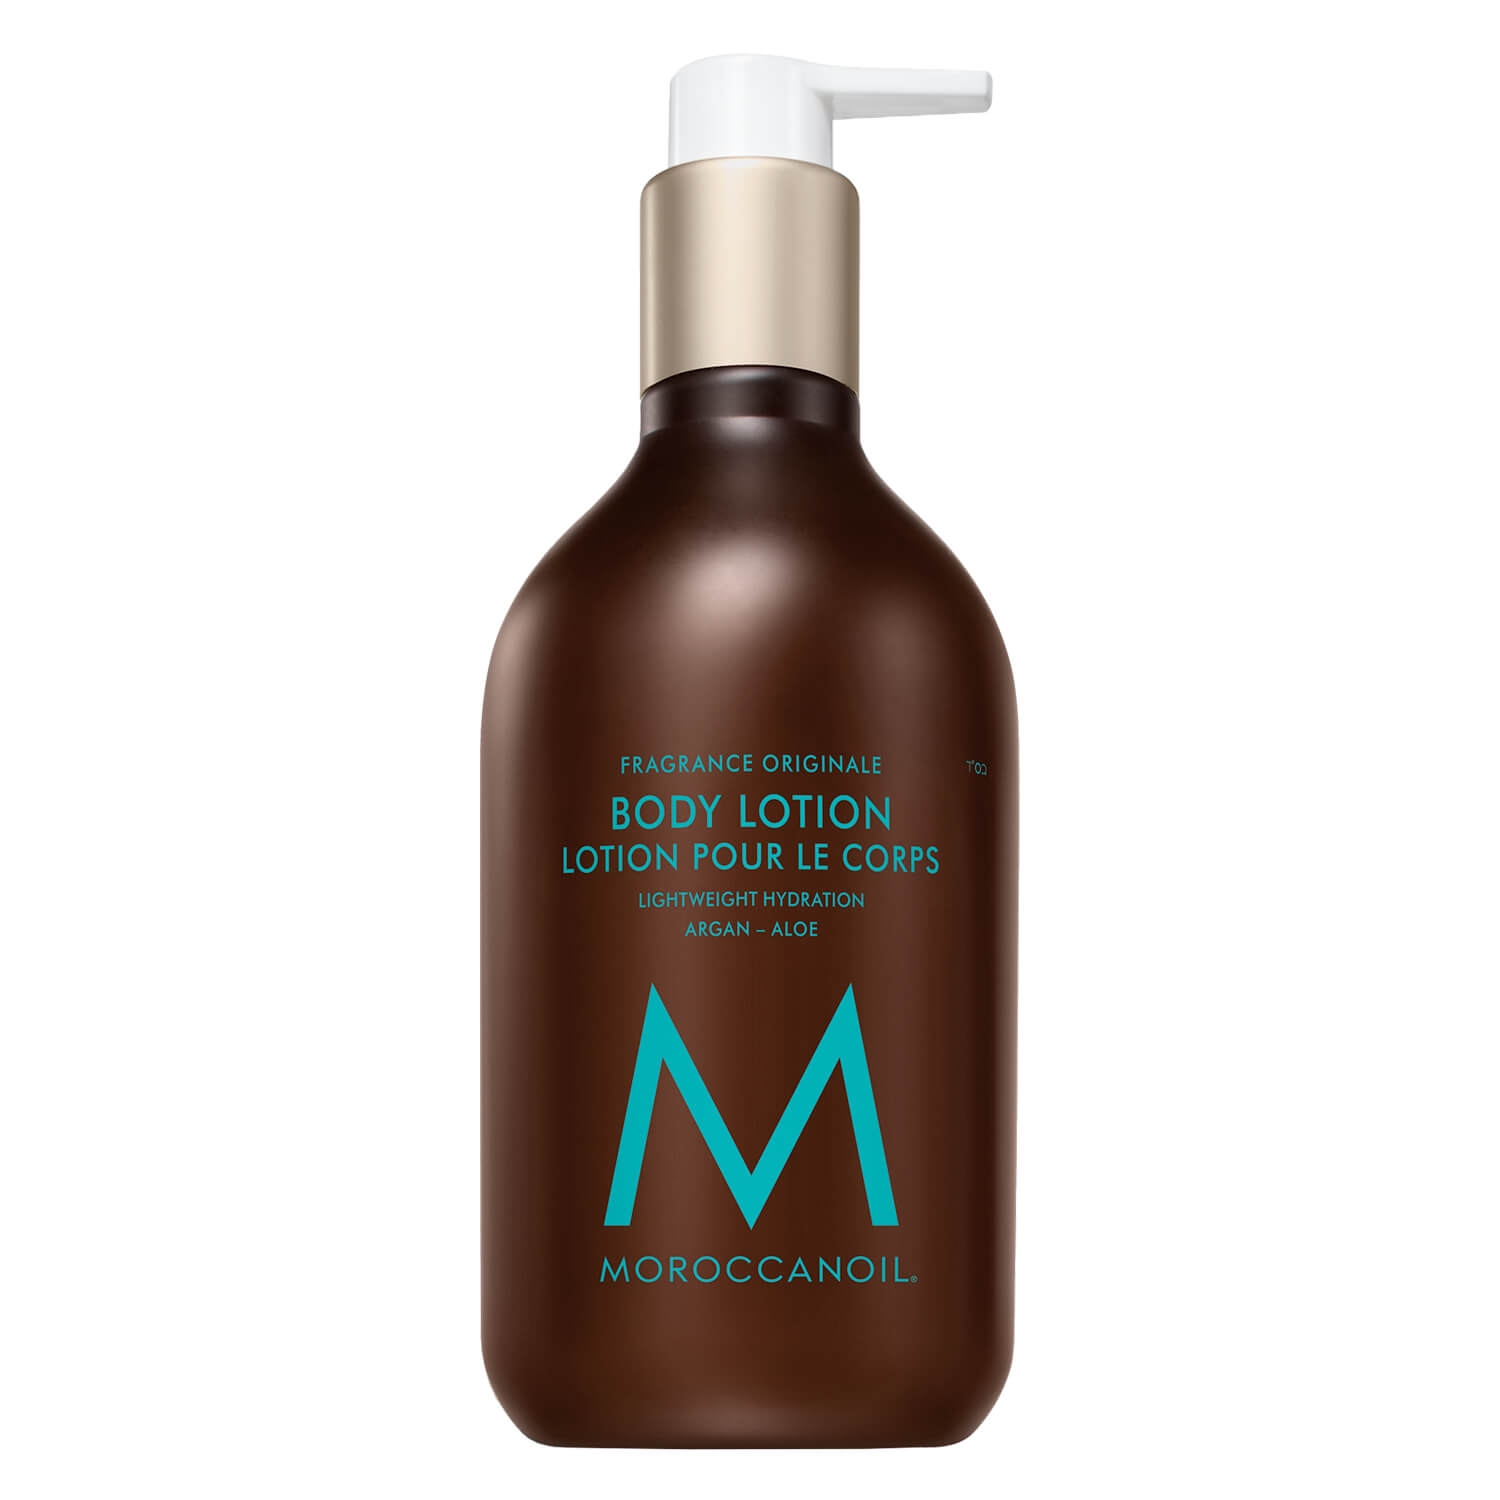 Product image from Moroccanoil Body Lotion Fragrance Originale